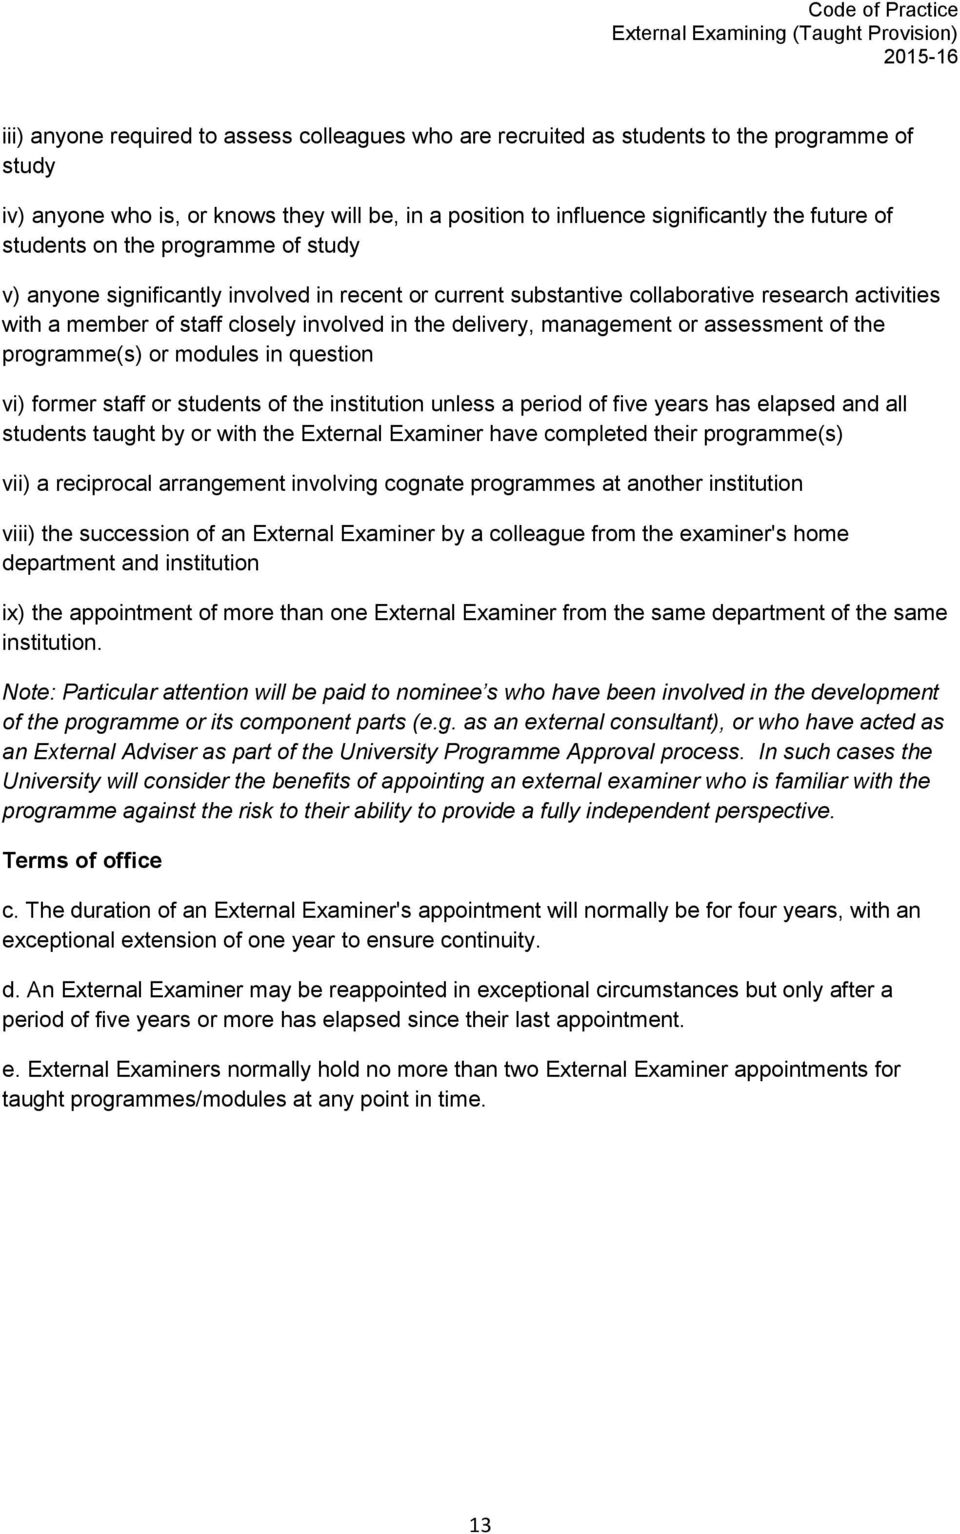 management or assessment of the programme(s) or modules in question vi) former staff or students of the institution unless a period of five years has elapsed and all students taught by or with the